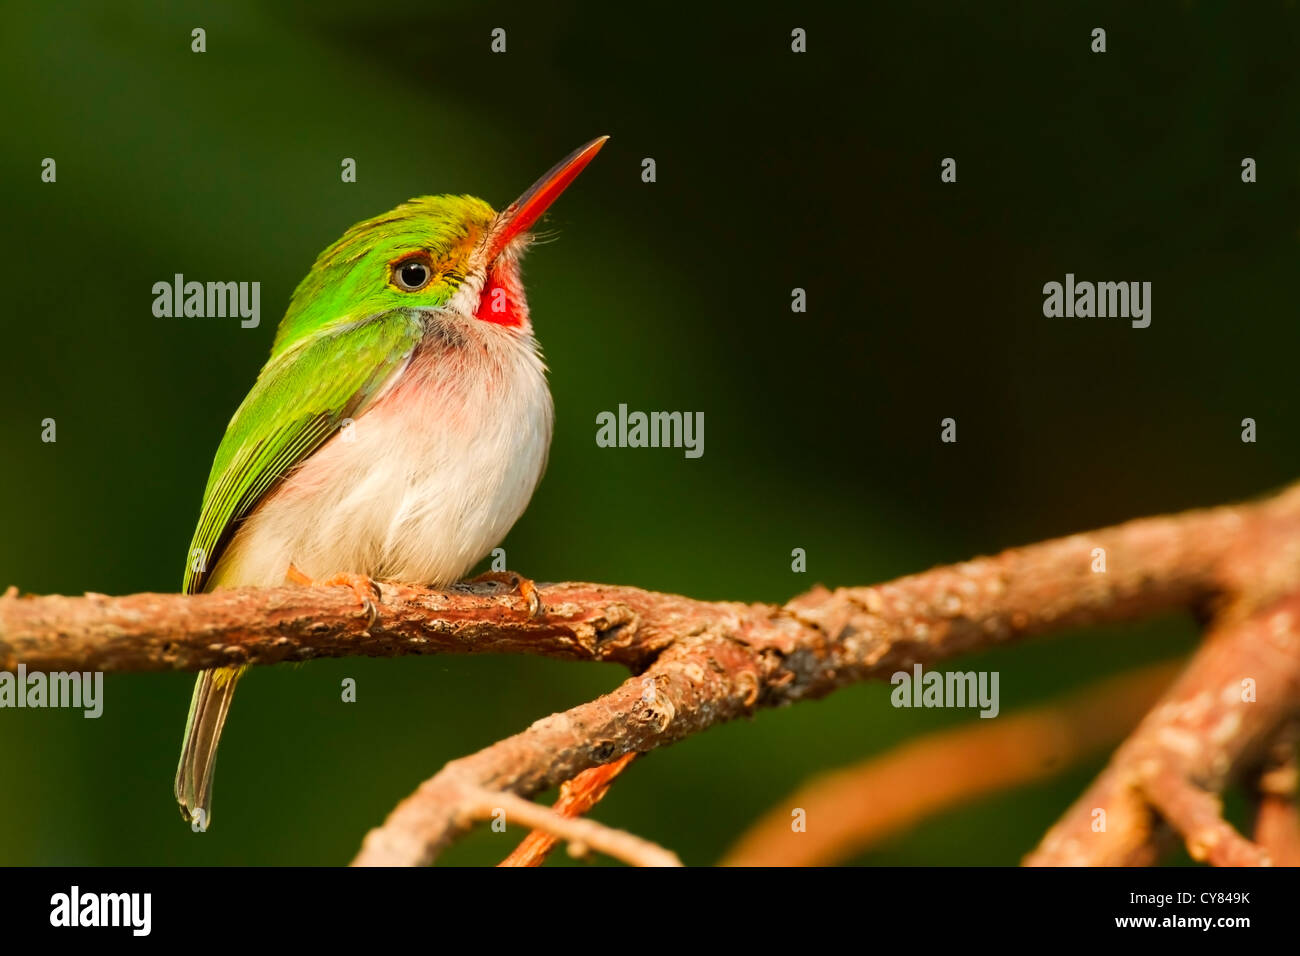 Cuban tody flycatcher (Todus multicolor), perched on branch looking right, Cuba, Caribbean Stock Photo